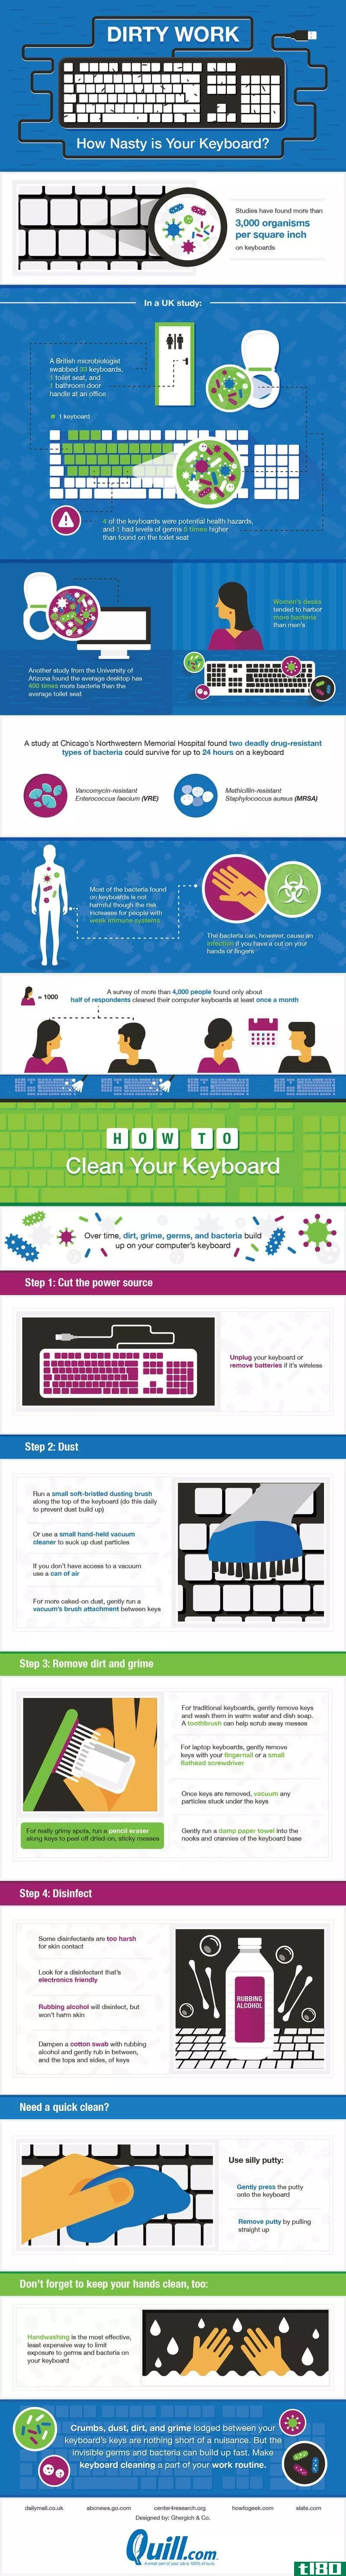 Illustration for article titled This Graphic Shows How Nasty Your Keyboard Can Get (and How to Clean It)